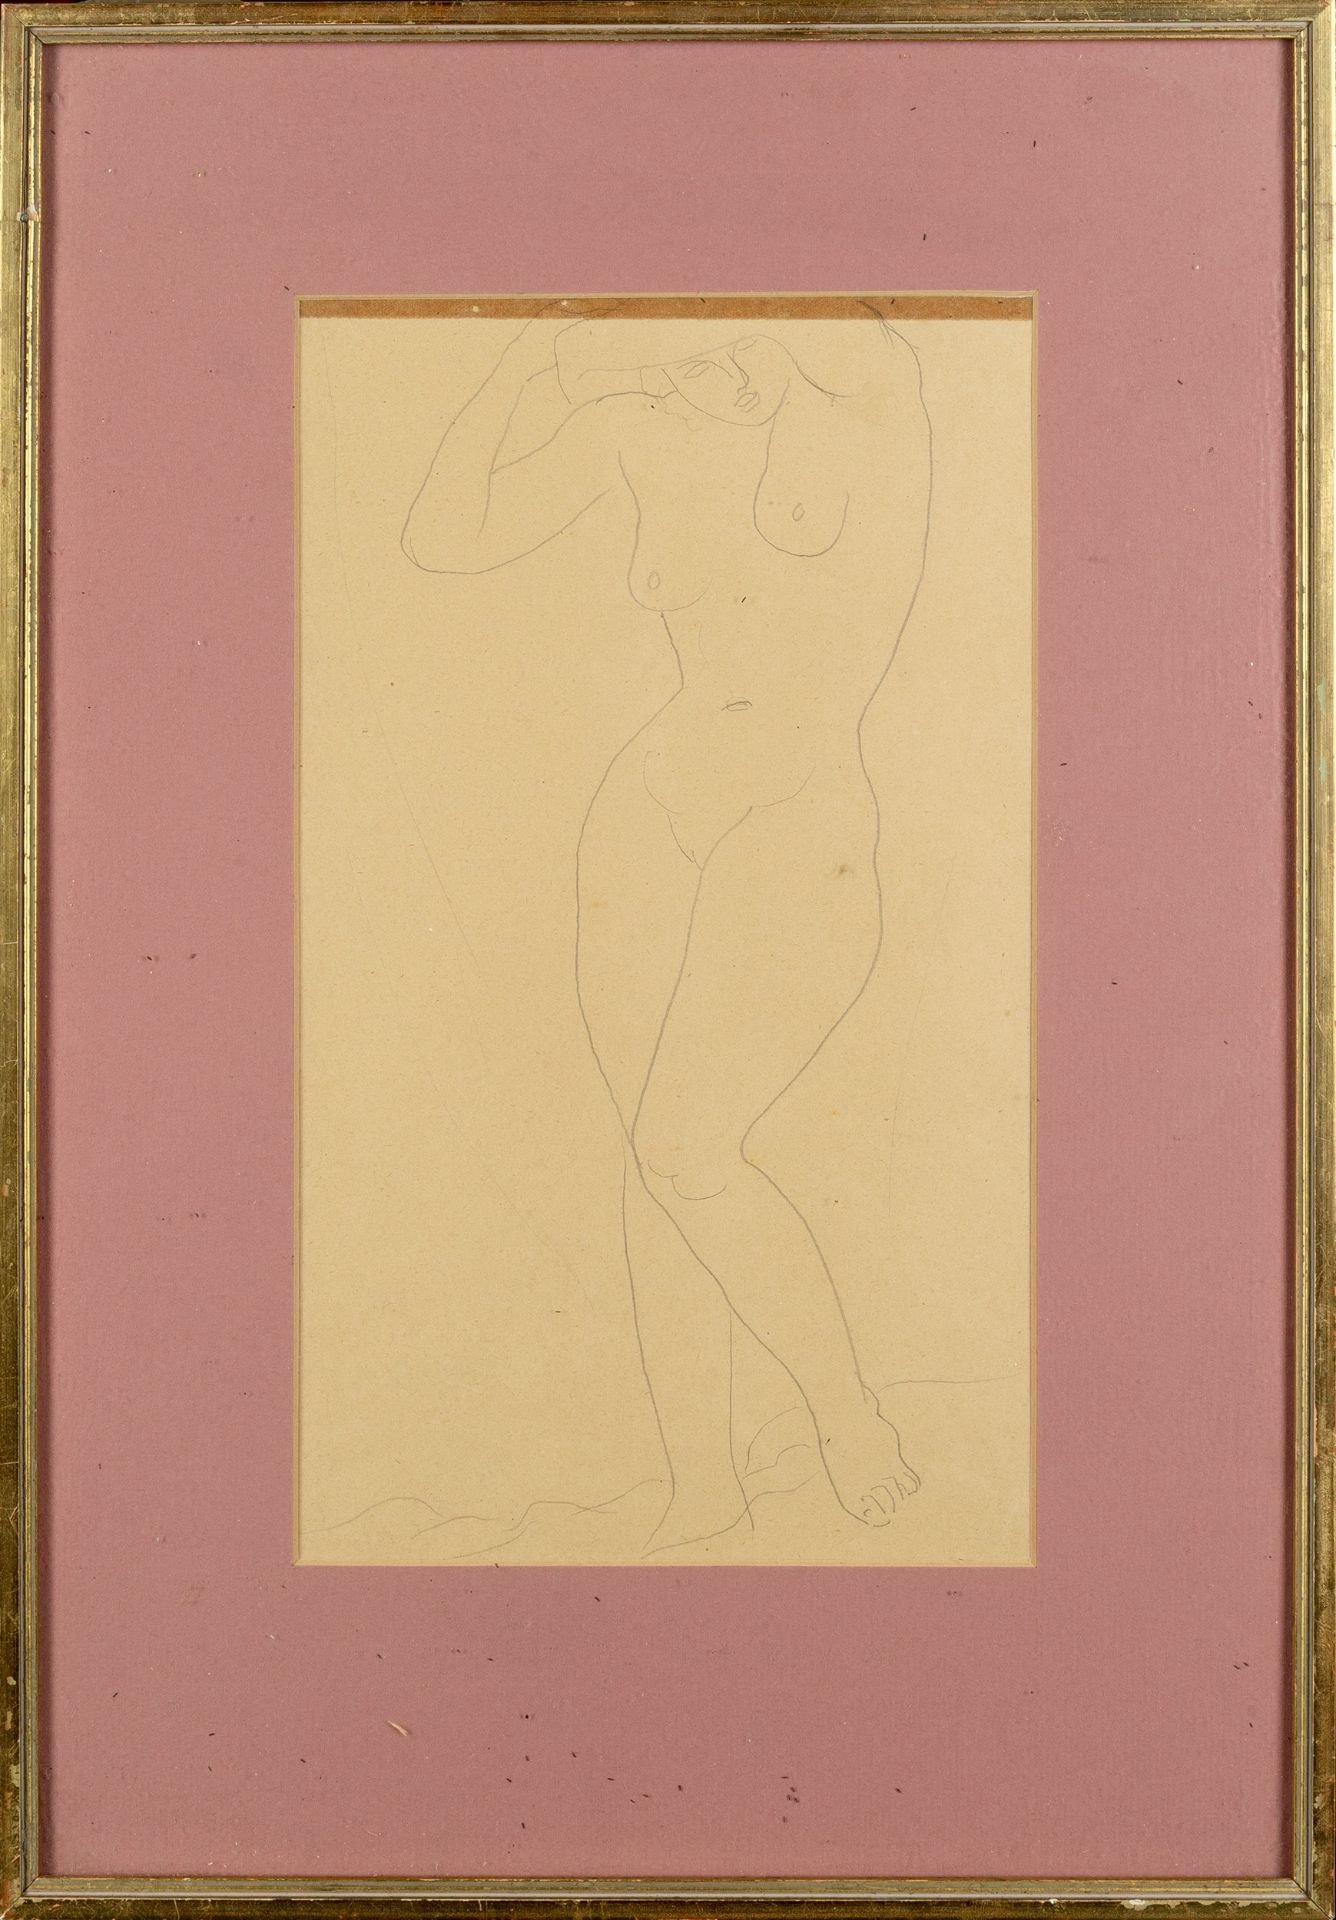 Christopher Wood (1901-1930) Nude with Raised Arm pencil on paper 31 x 18cm. Provenance: Manor - Image 2 of 3